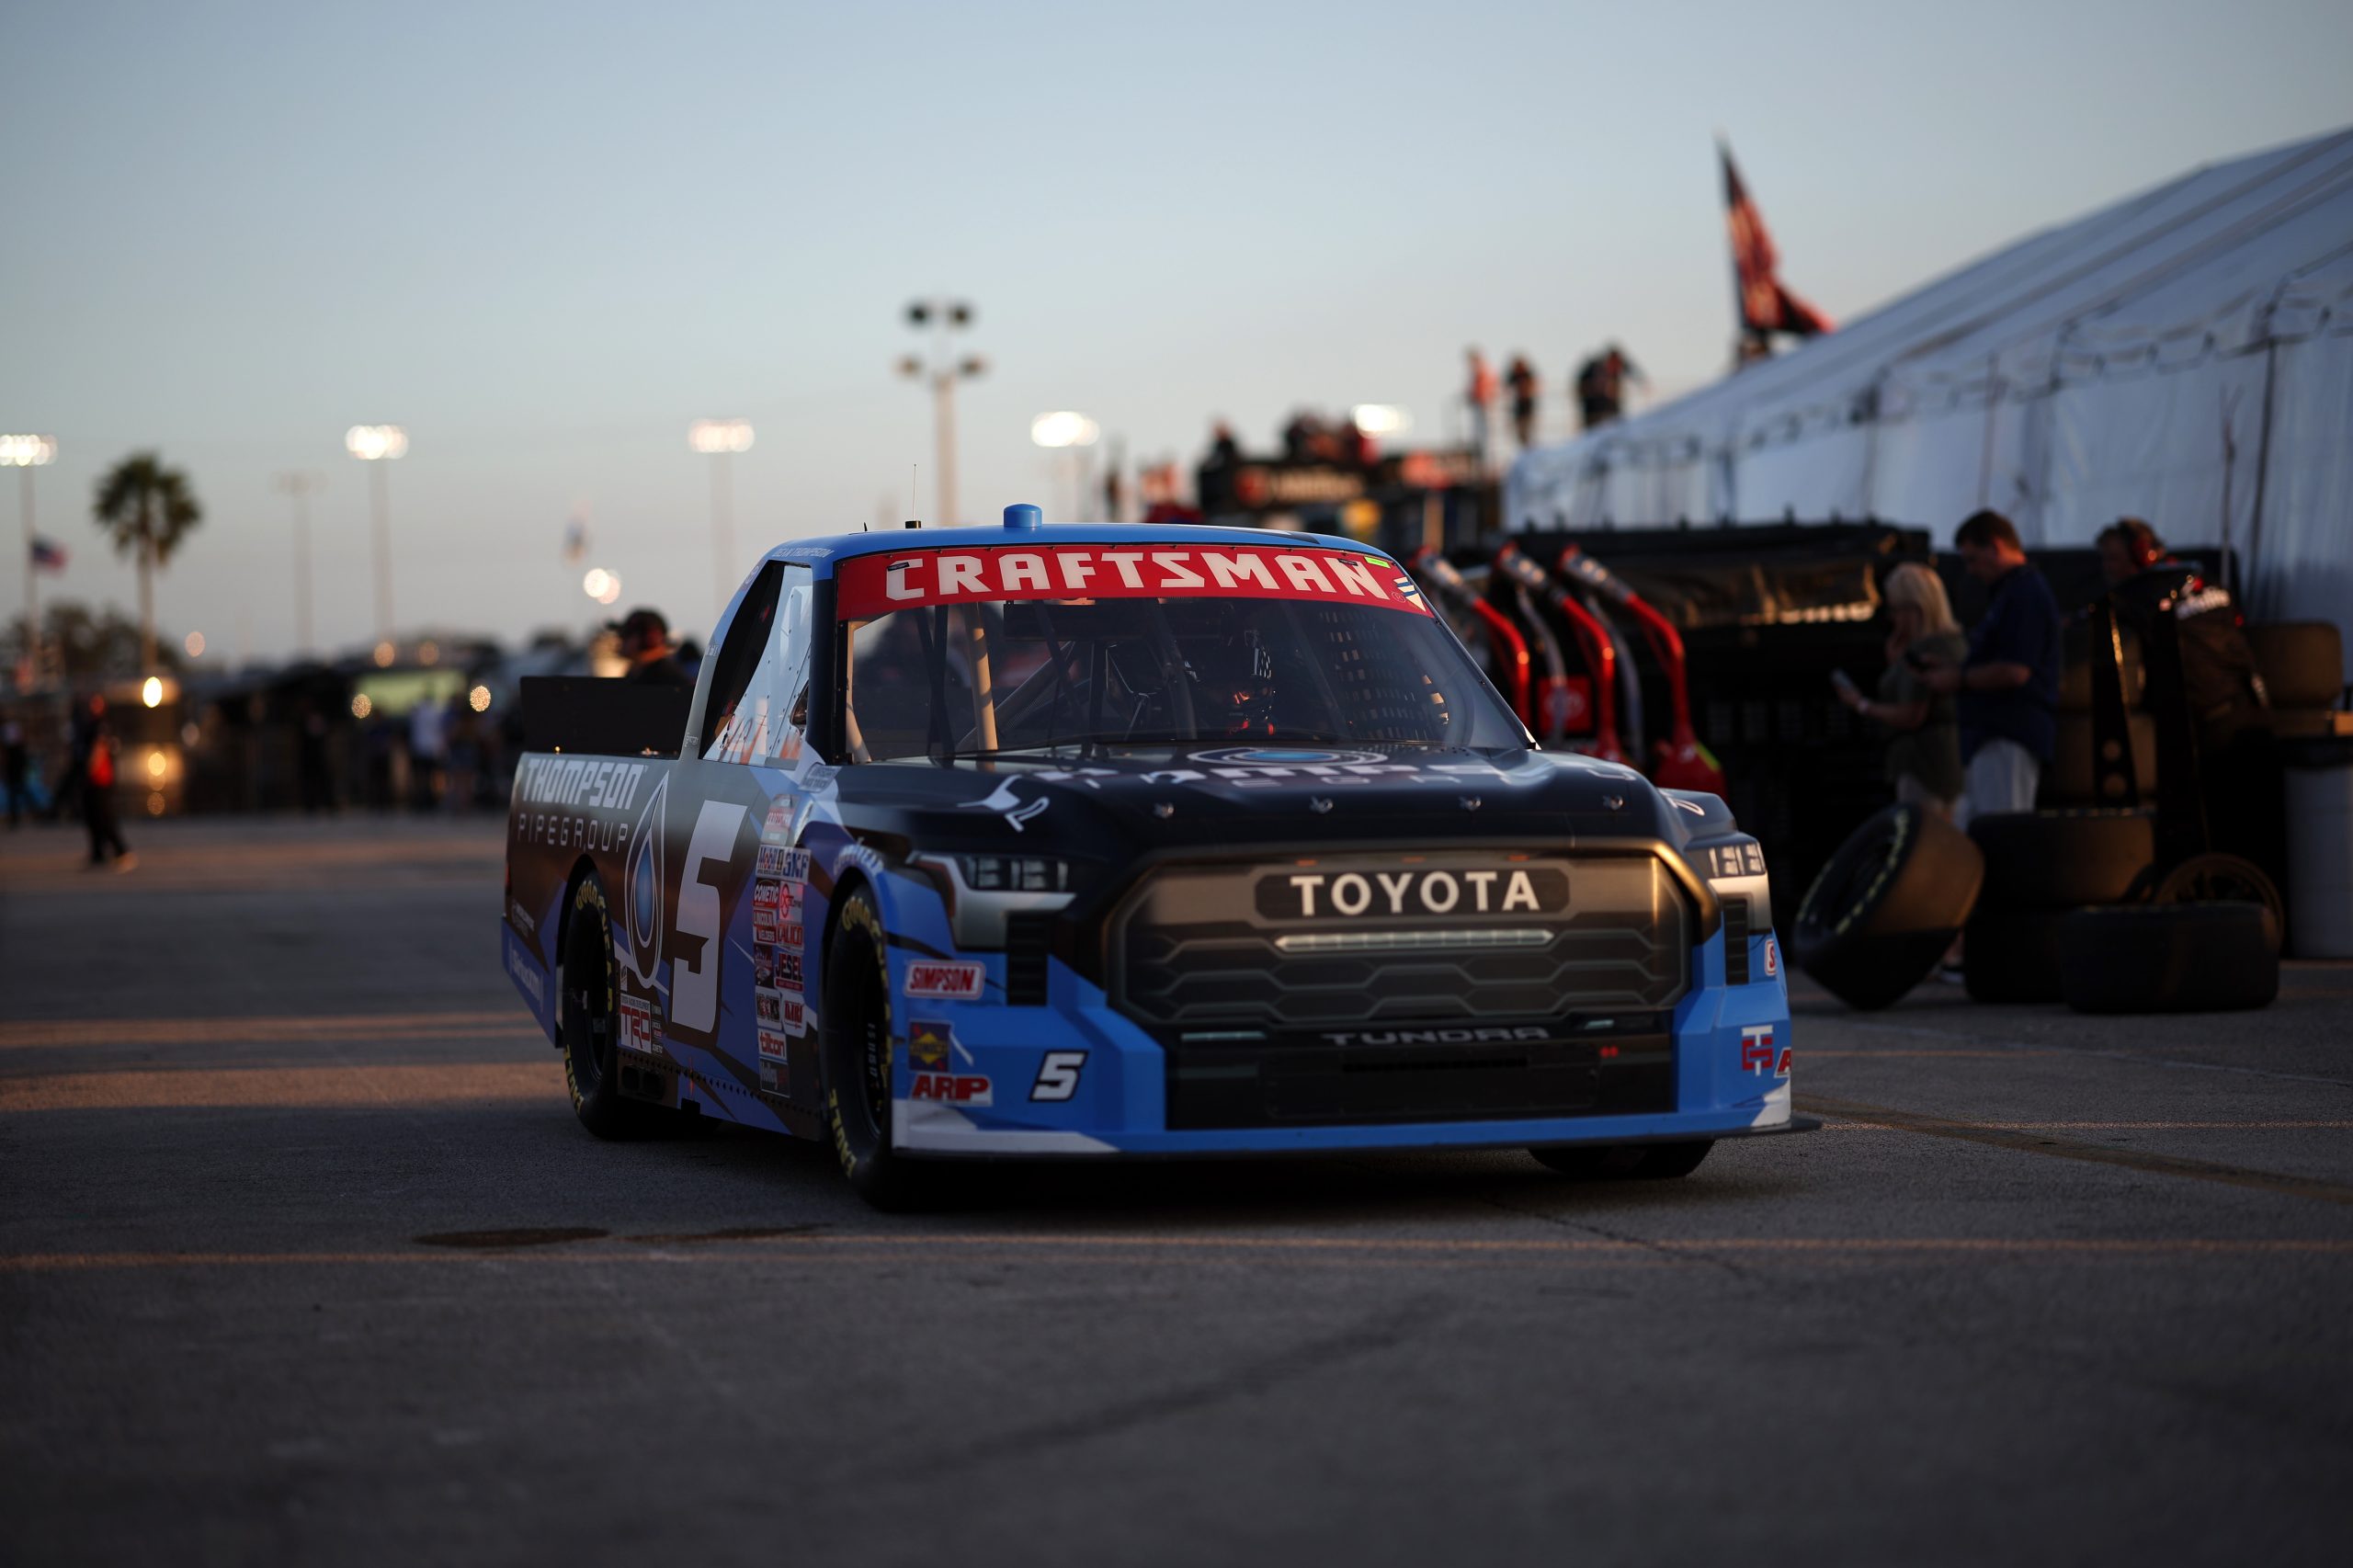 DAYTONA BEACH, FLORIDA - FEBRUARY 16: Dean Thompson, driver of the #5 Thompson Pipe Group Toyota, drives thought the garage area during practice for the NASCAR Craftsman Truck Series NextEra Energy 250 at Daytona International Speedway on February 16, 2023 in Daytona Beach, Florida. (Photo by James Gilbert/Getty Images)